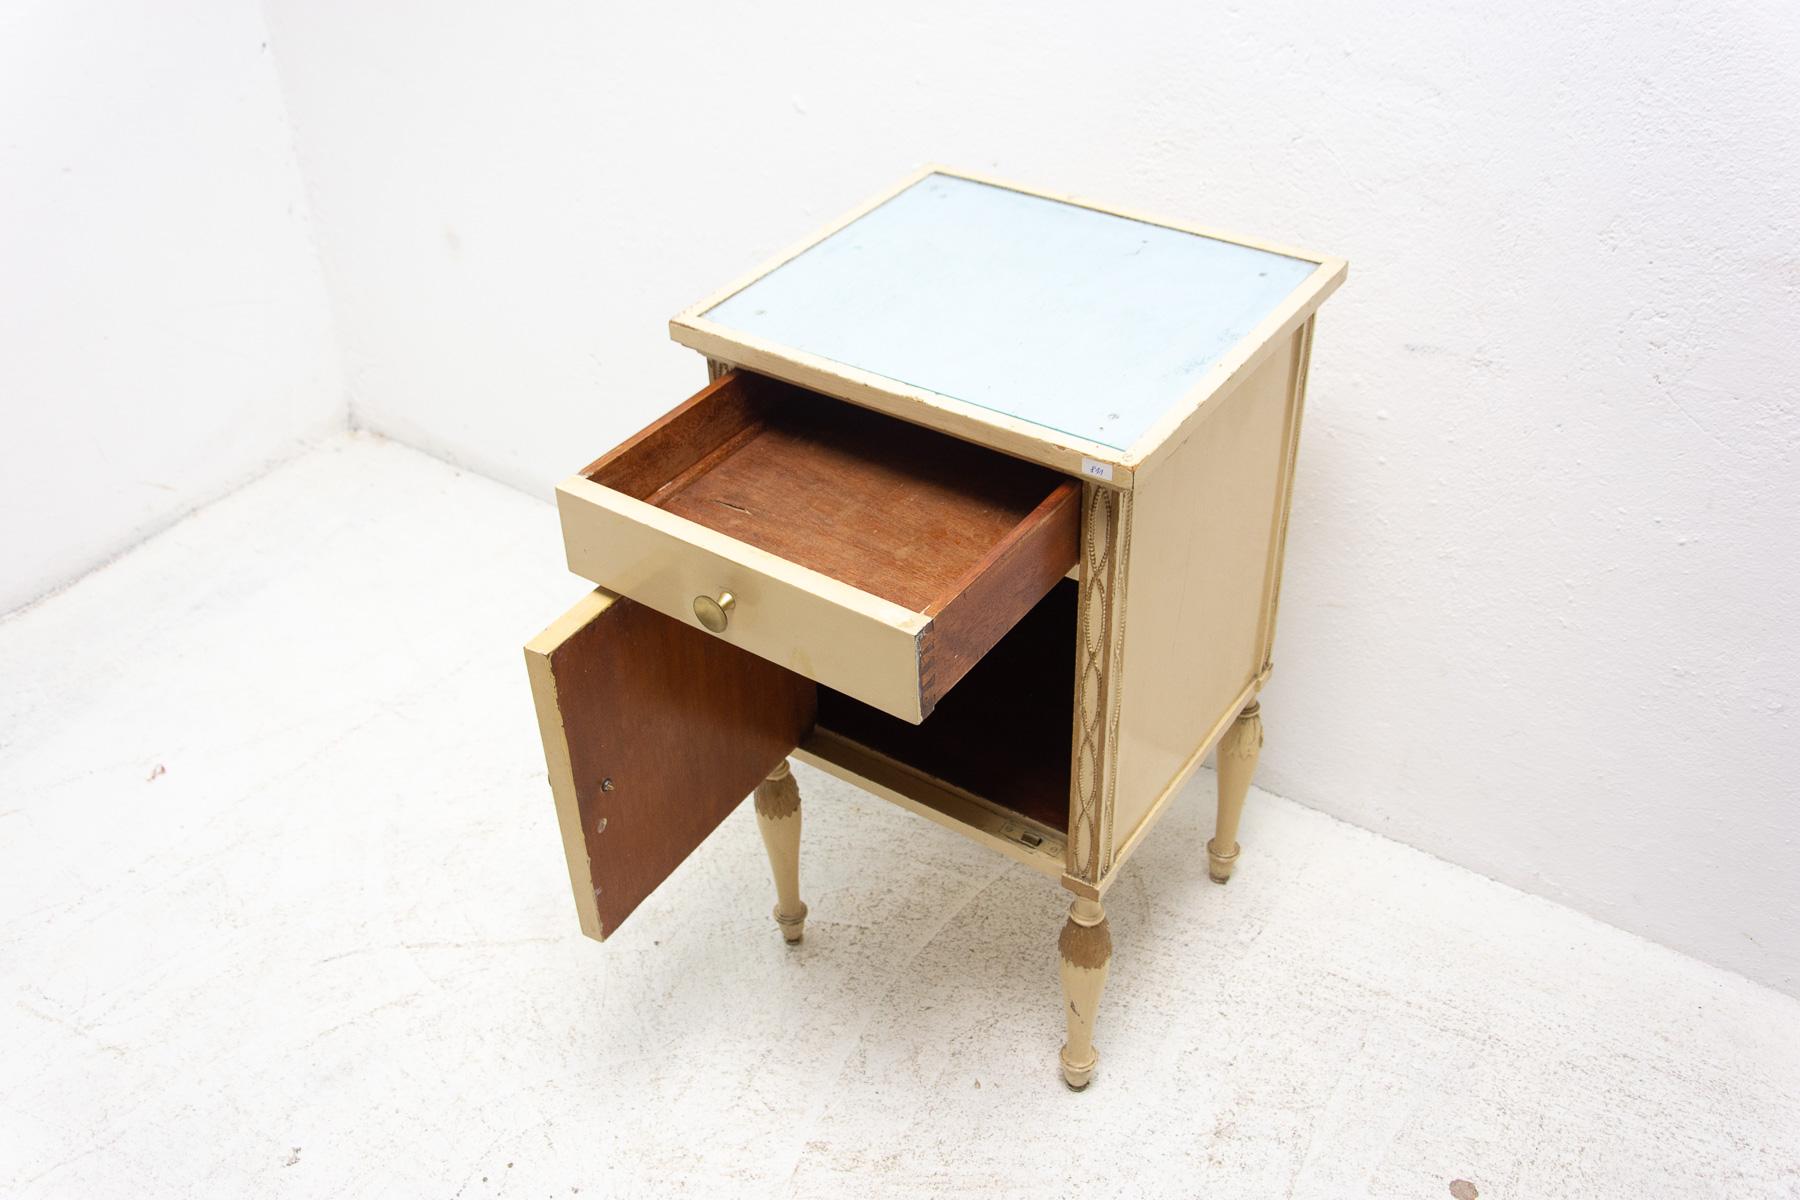 20th Century Historicist Bedside Table, 1910, Portois and Fix, Austria-Hungary